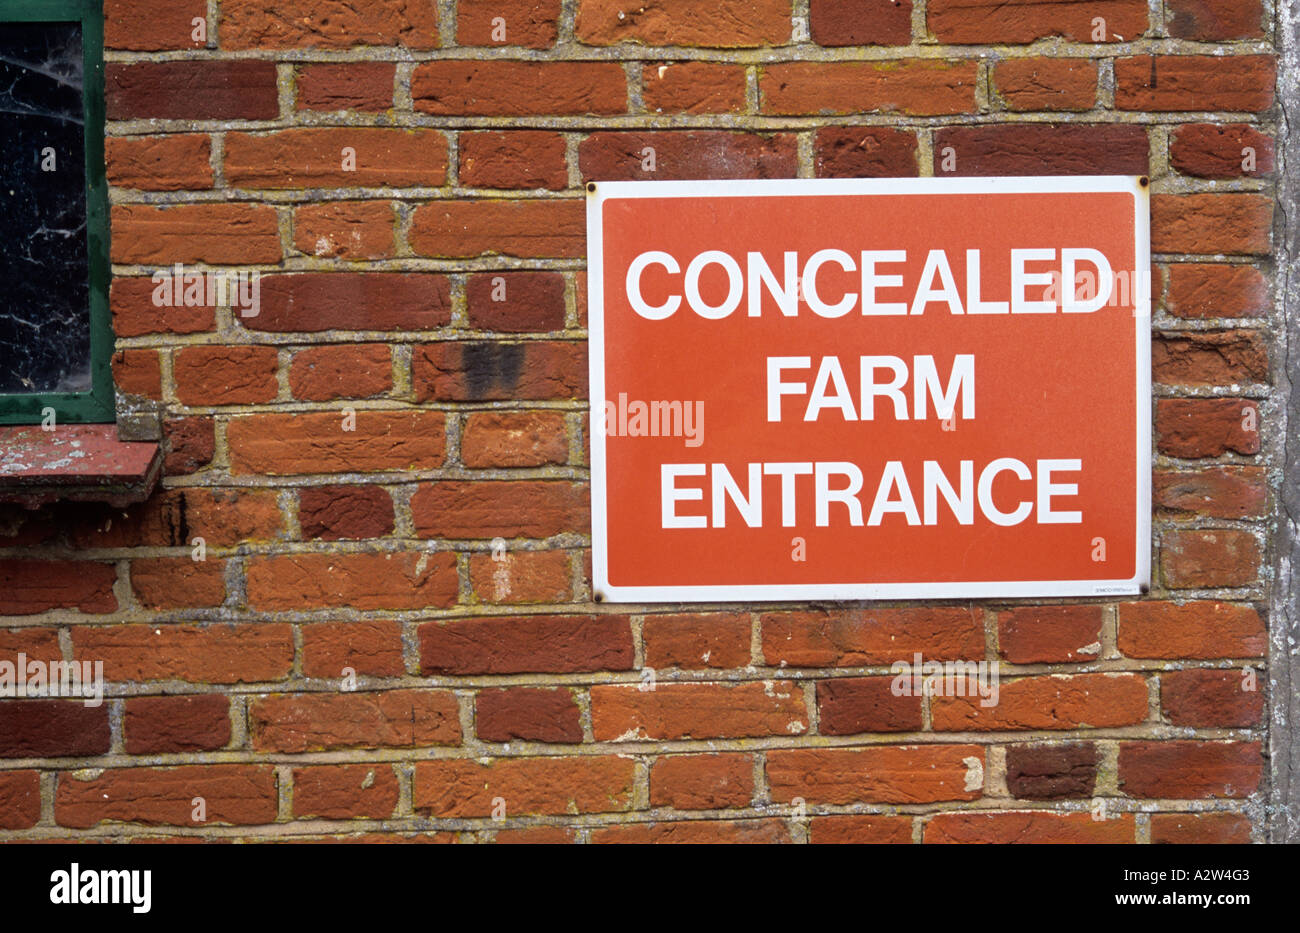 Red and white sign fixed to an orange brick wall warning of a Concealed farm entrance Stock Photo